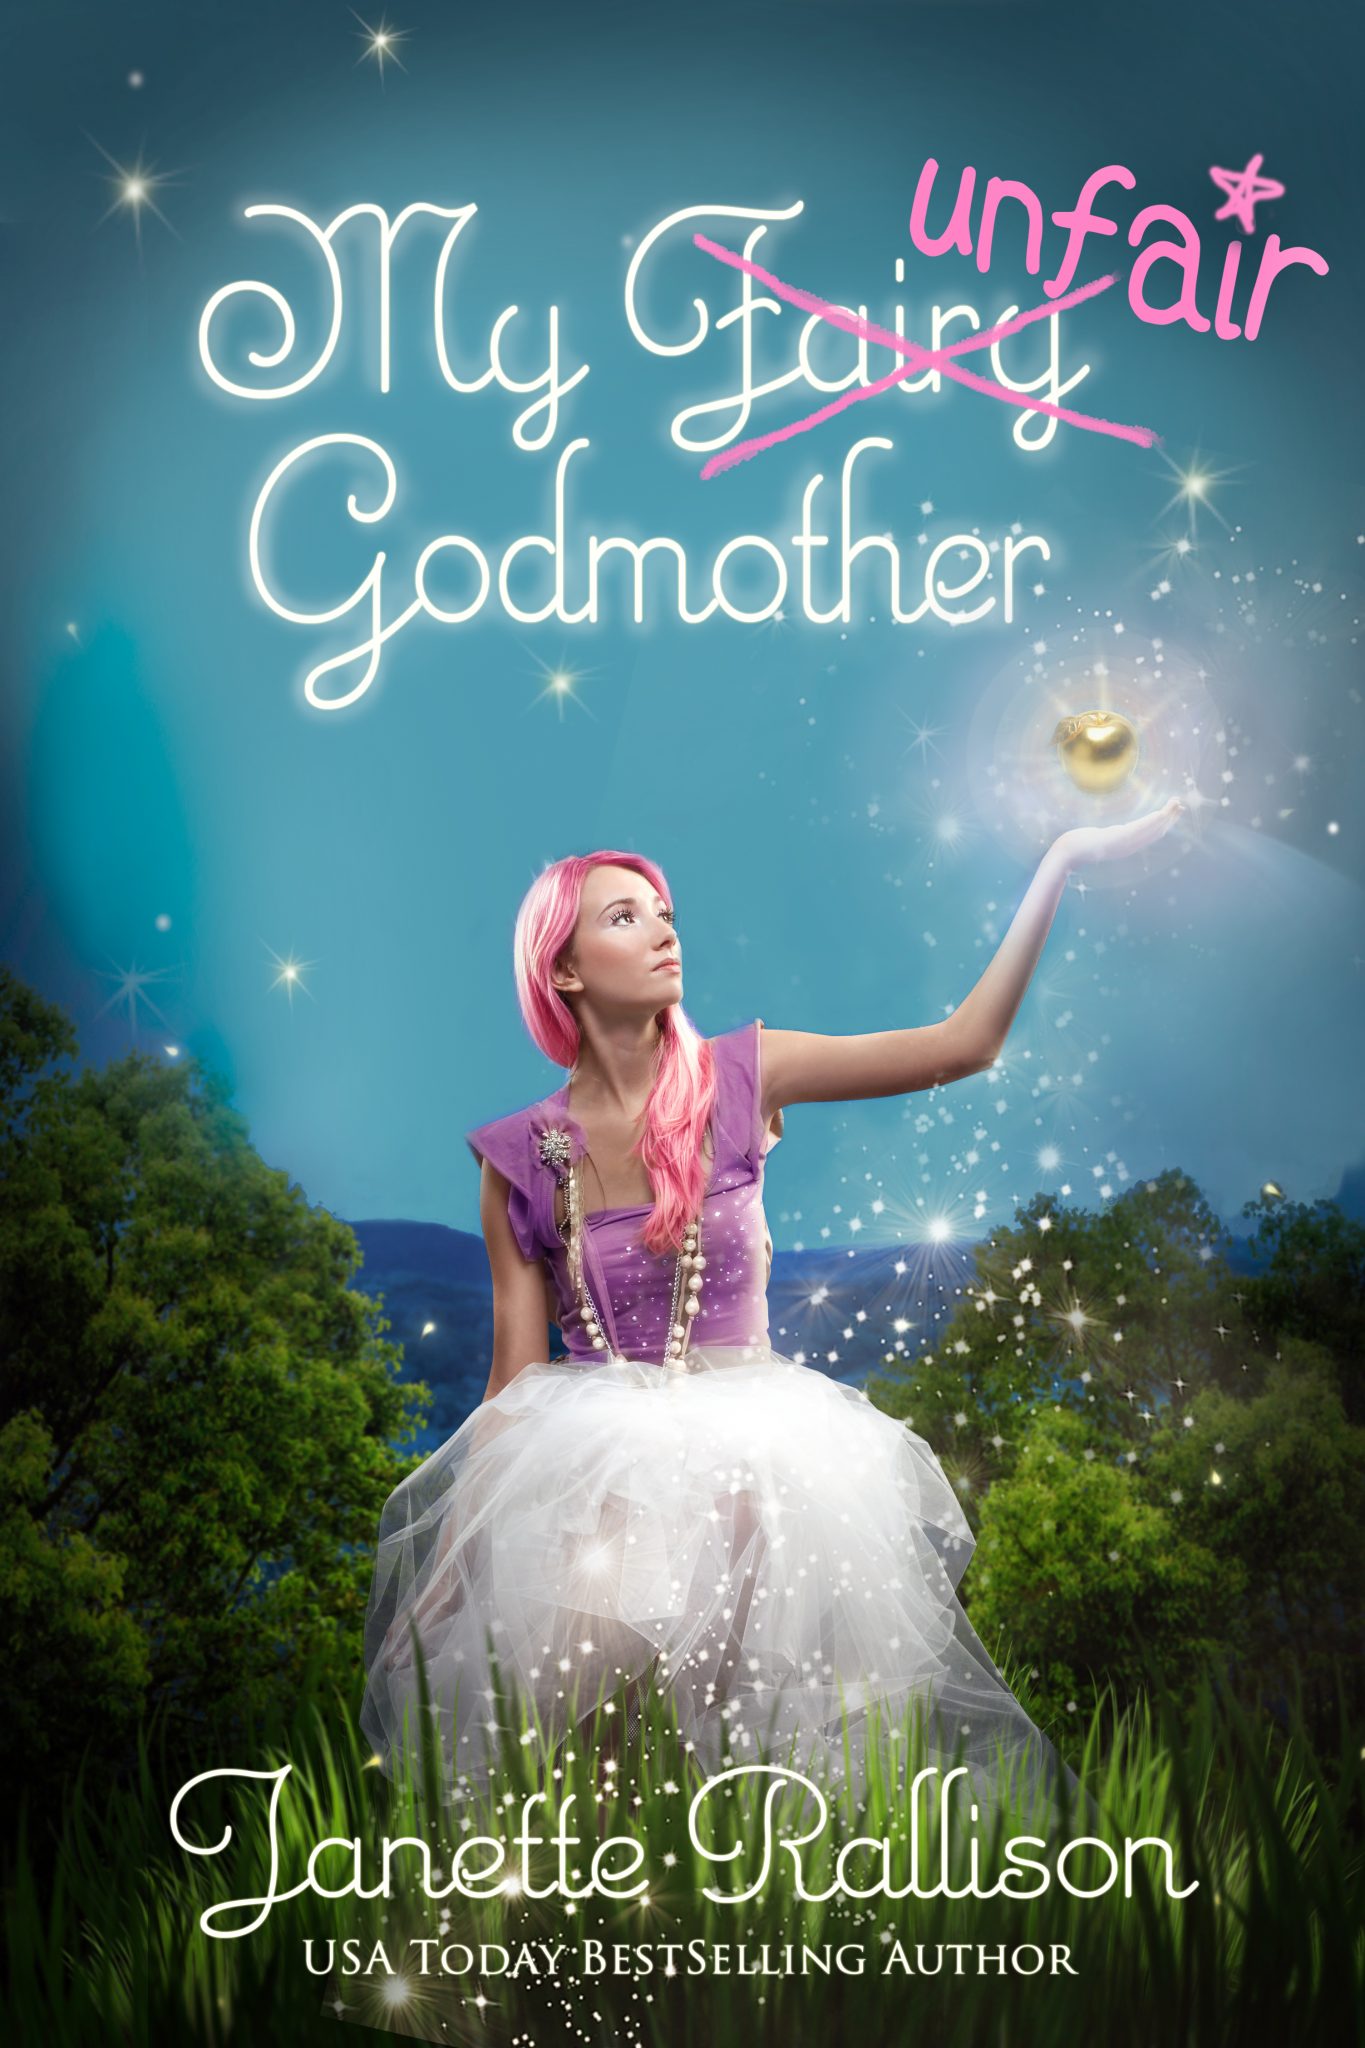 My Fair Godmother by Janette Rallison